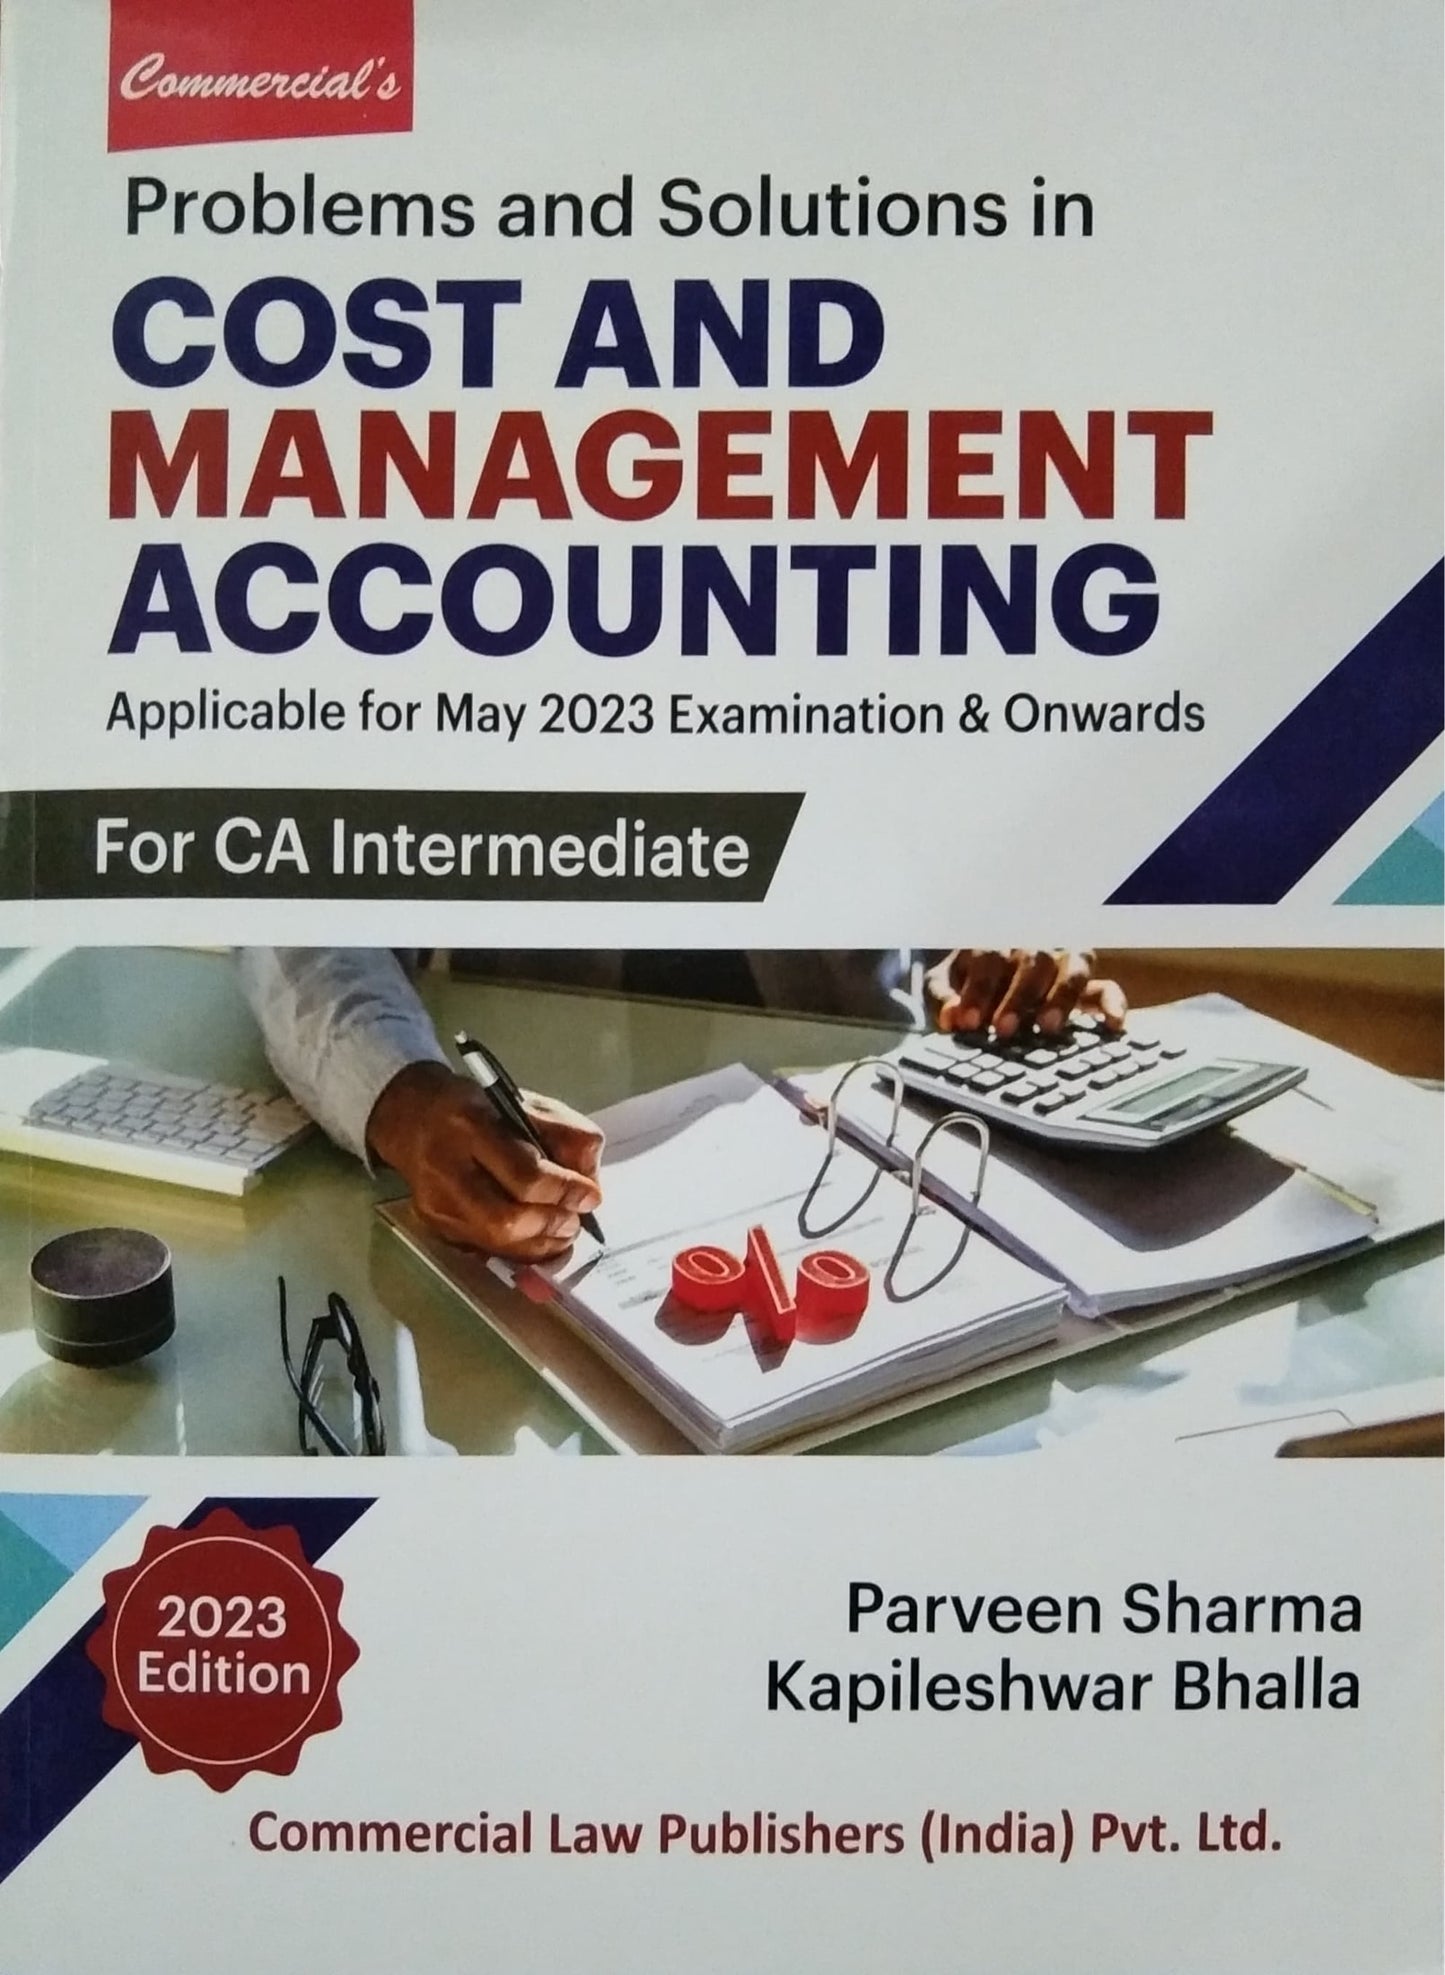 Promblems and Solutions in Cost And Management Accounting